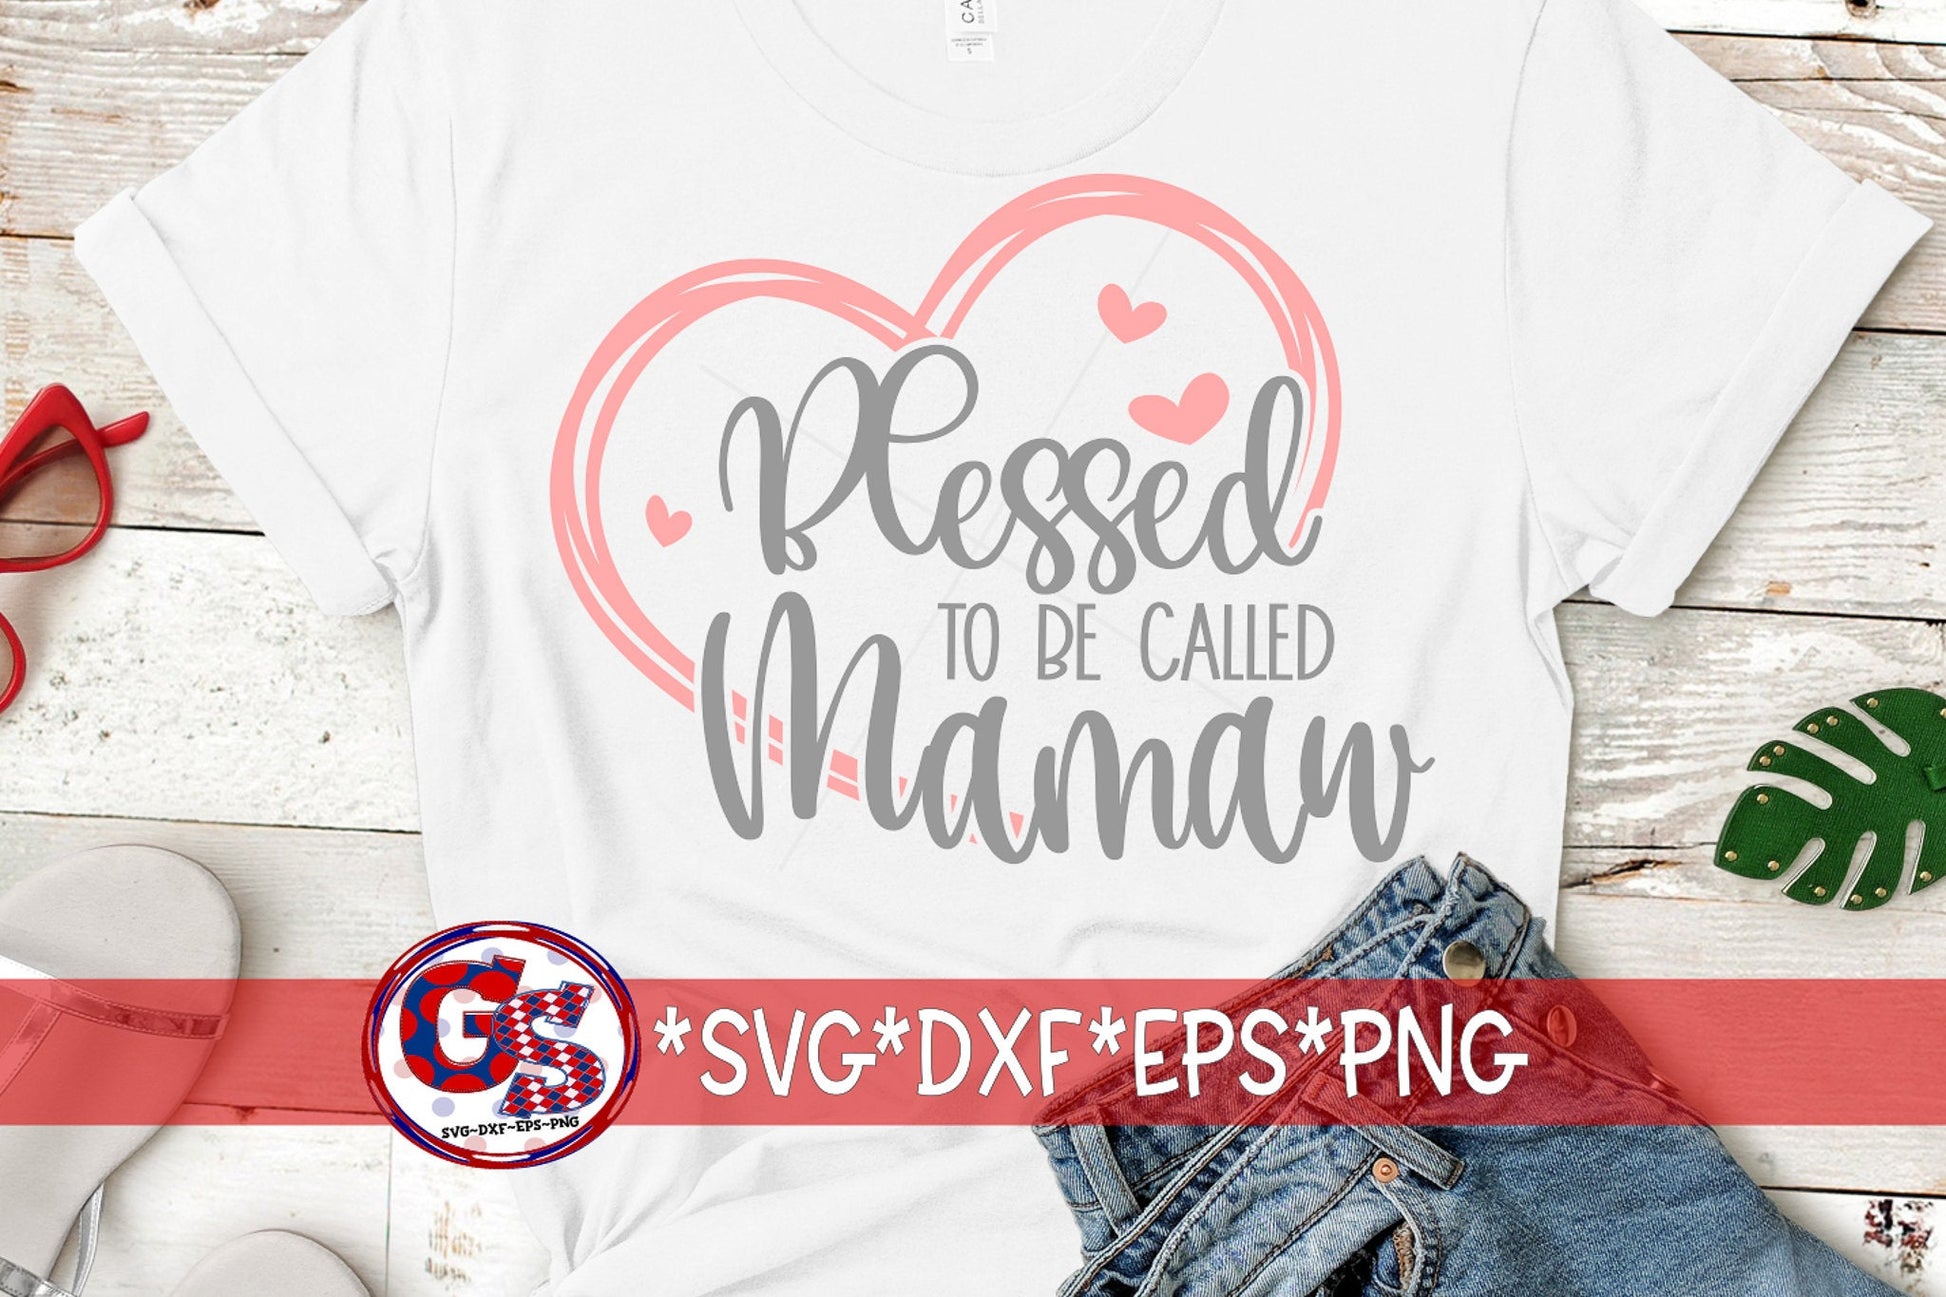 Blessed To Be Called Mamaw SvG | Mother&#39;s Day SVG | Mamaw SVG | Grandma DxF | Blessed Mamaw svg dxf eps png. Instant Download Cut File